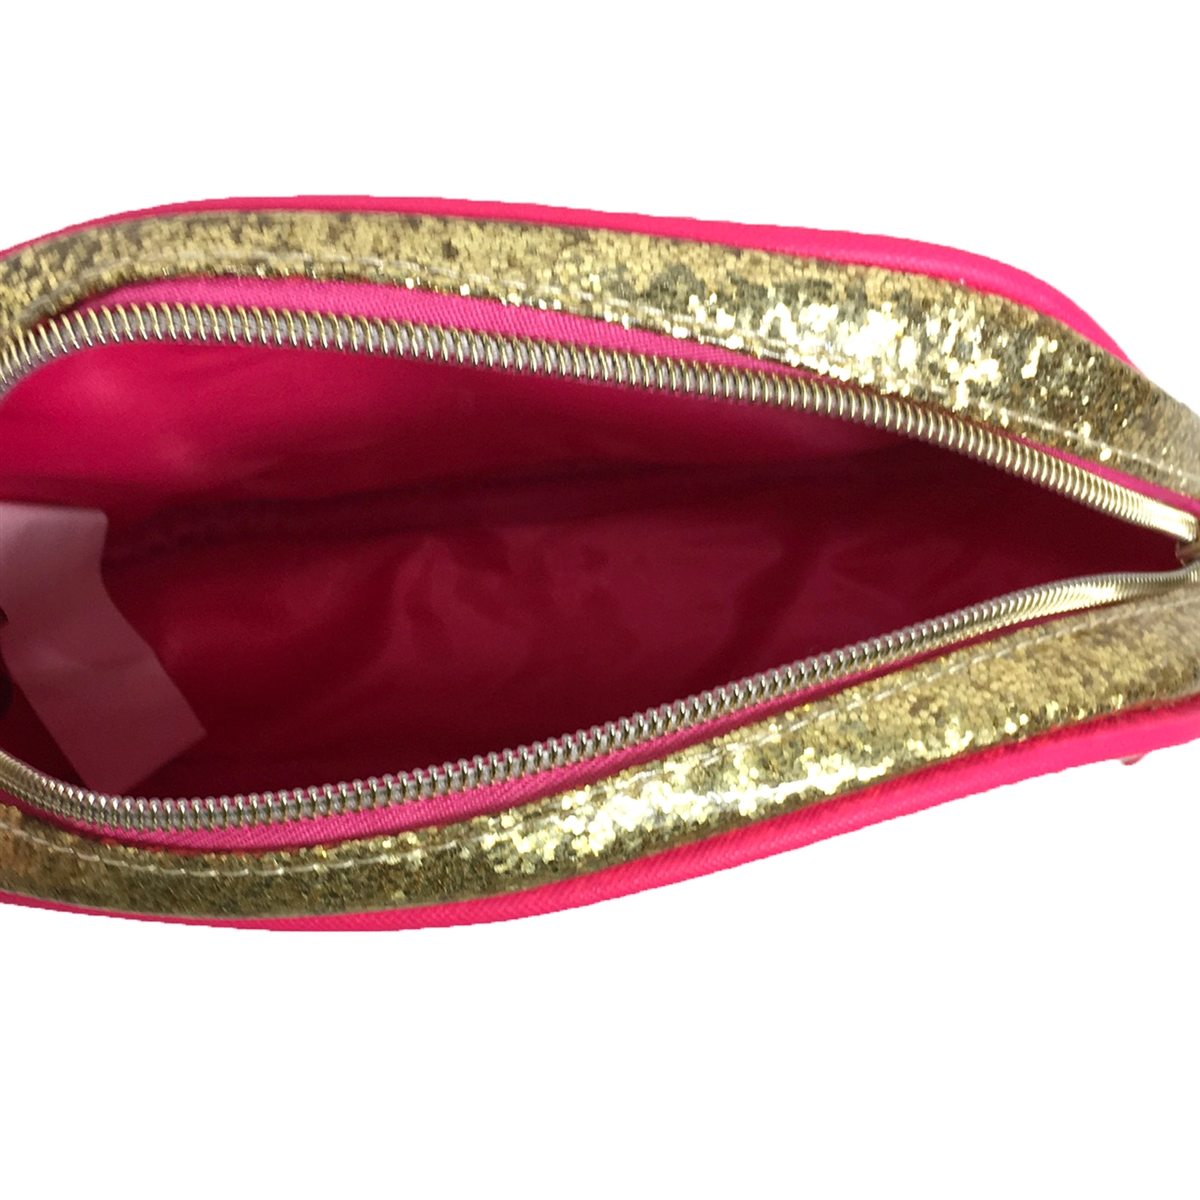 Marilyn Monroe Beautiful Glitter Dome Cosmetic Case, Gold/Pink